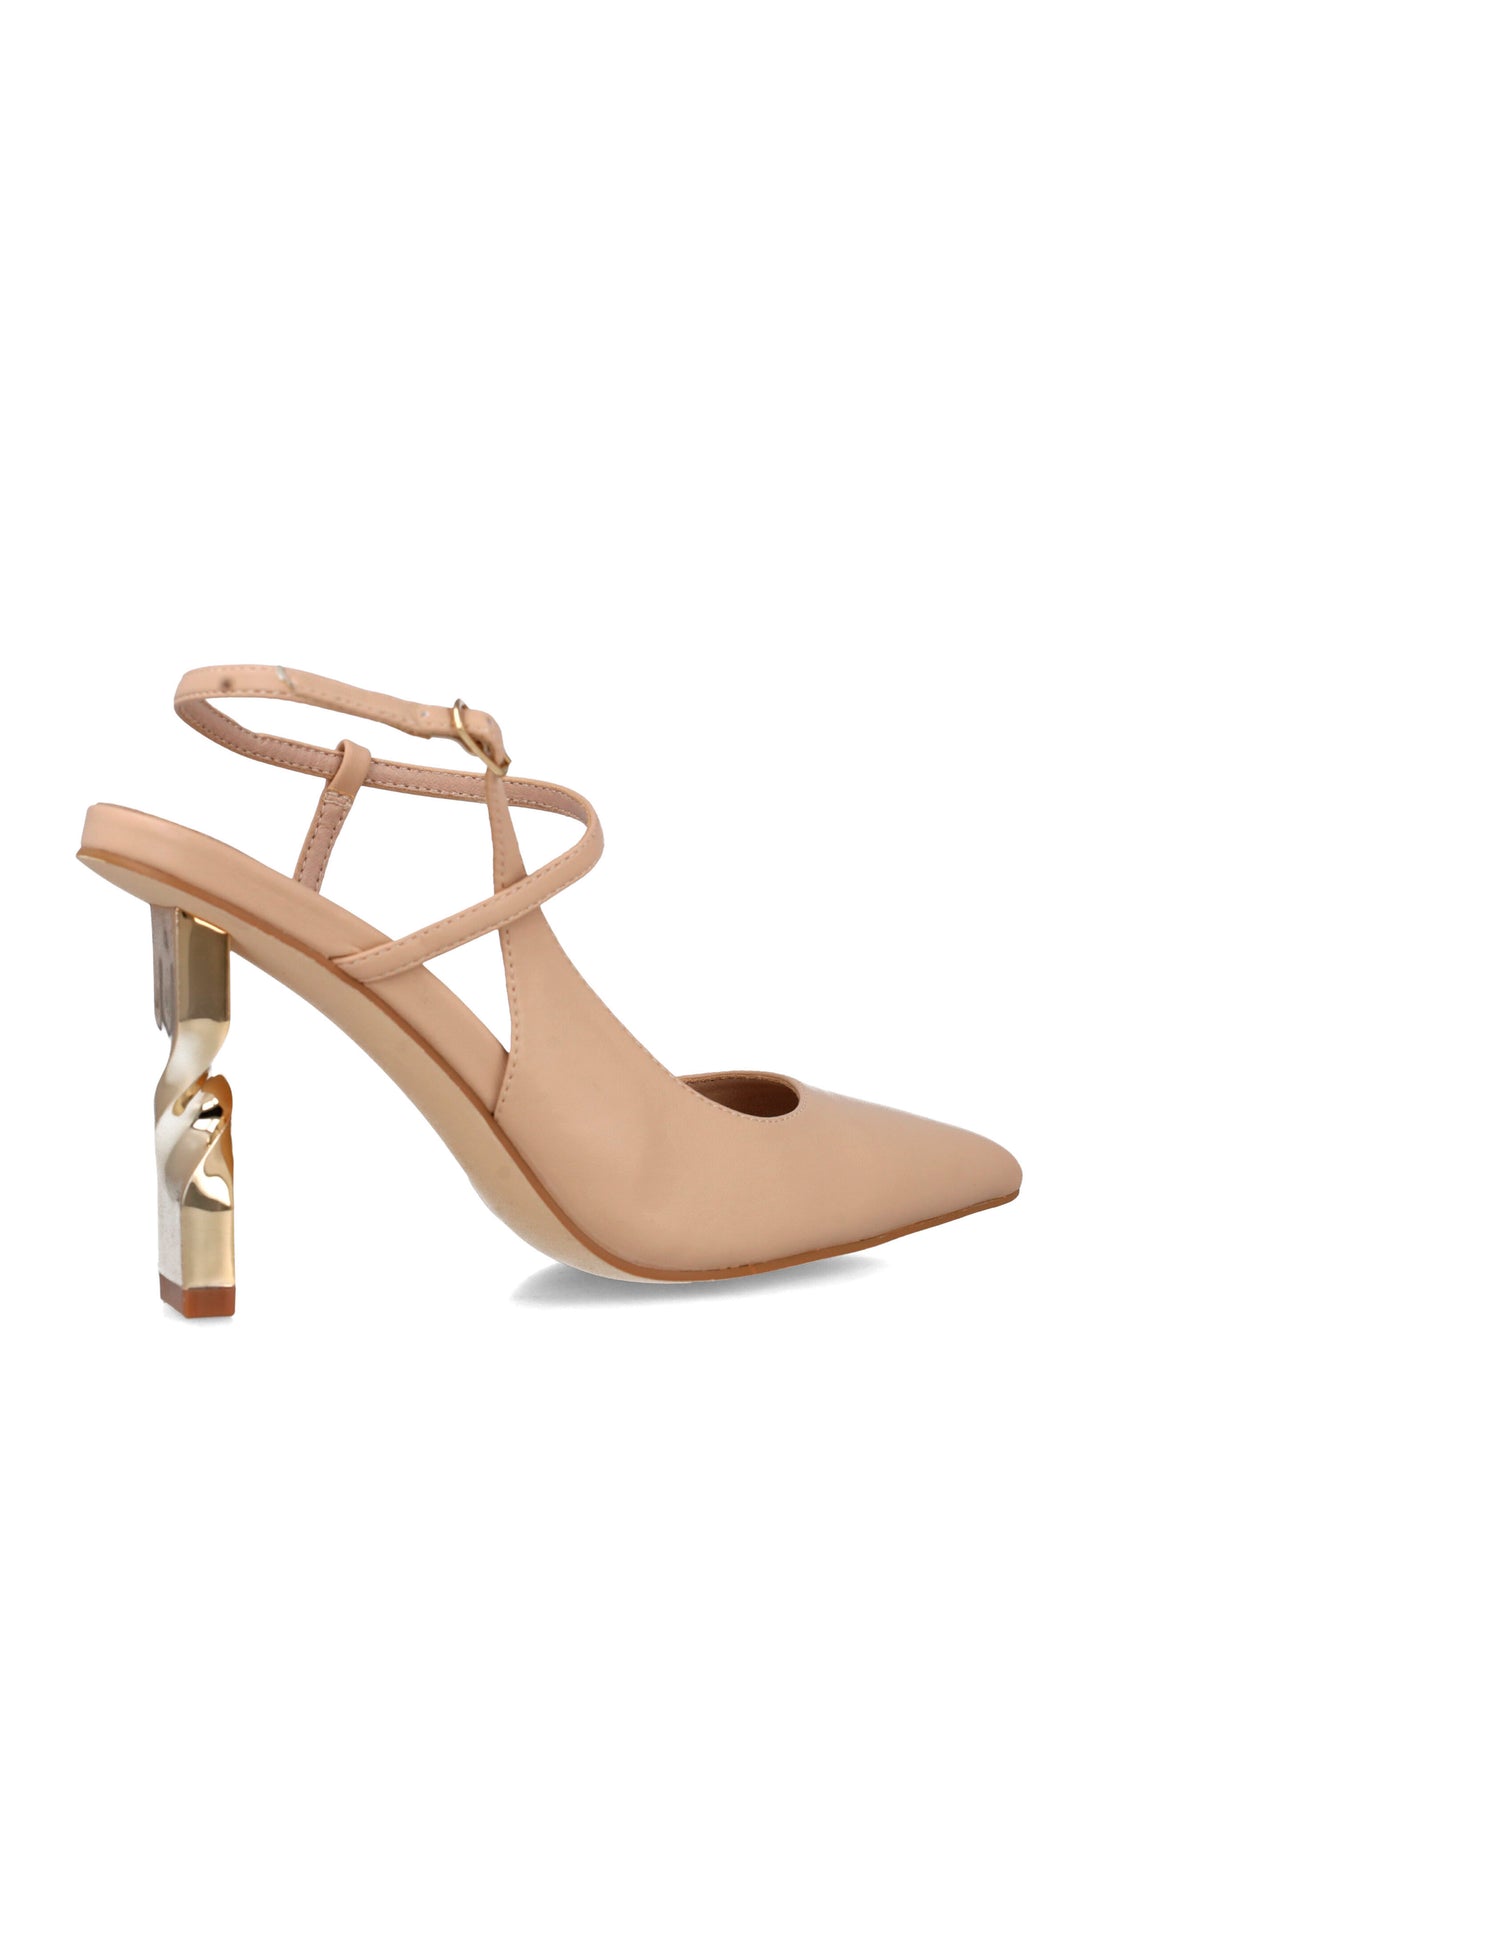 Beige Ankle Strap Pumps With Geometric Heels_24857_87_03